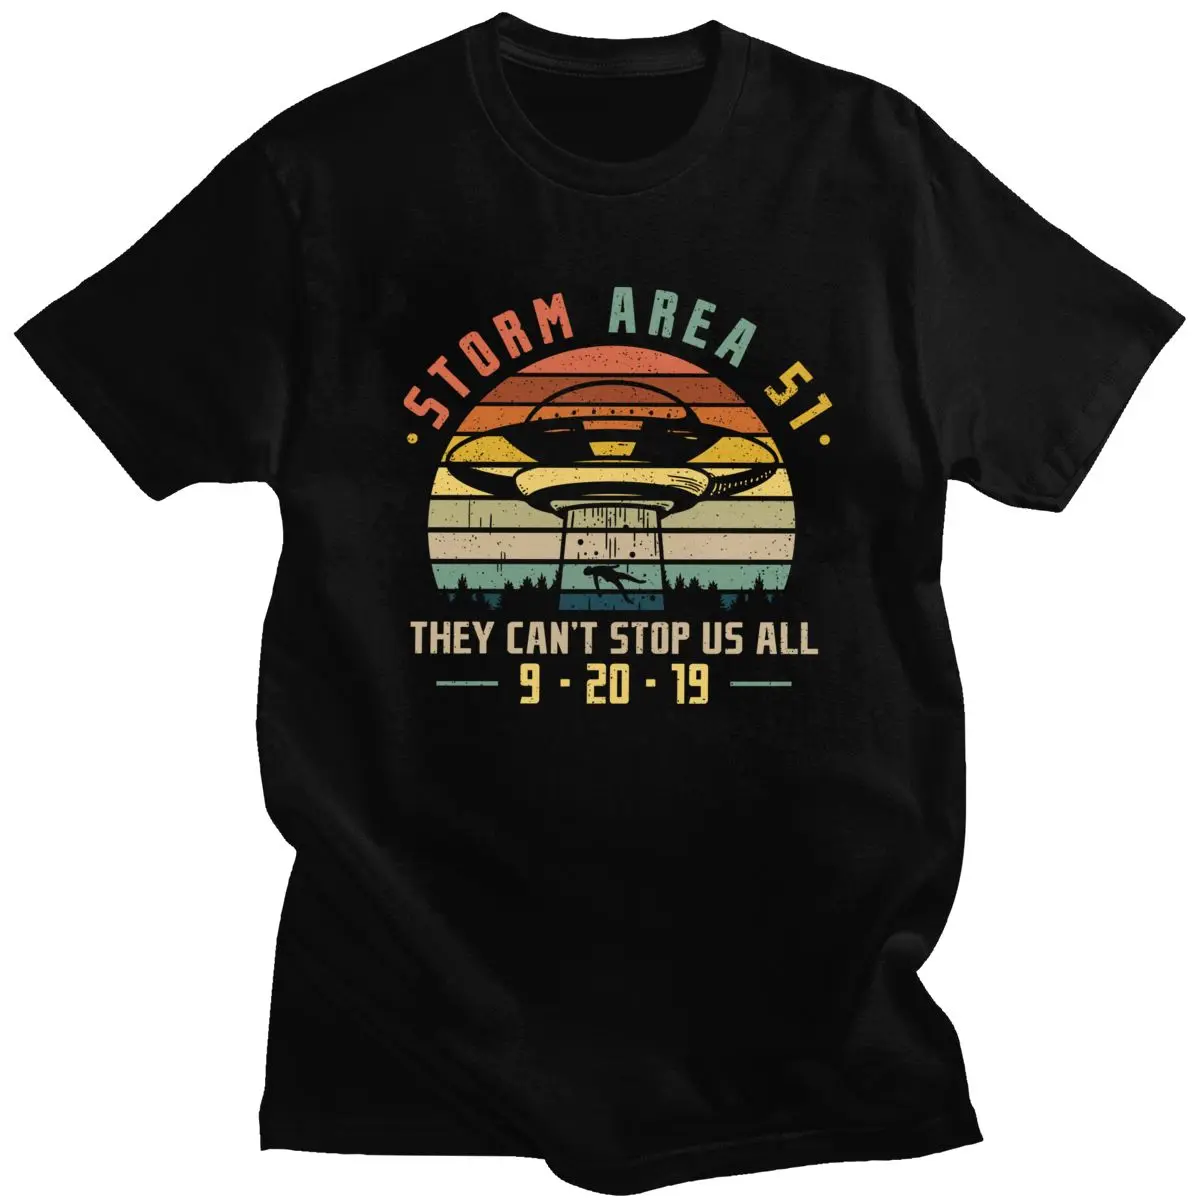 

Storm Area 51 T-Shirt They Can't Stop All Of Us T Shirt for Men Cotton Short Sleeves UFO Take People Away Alien Tee Top Clothing